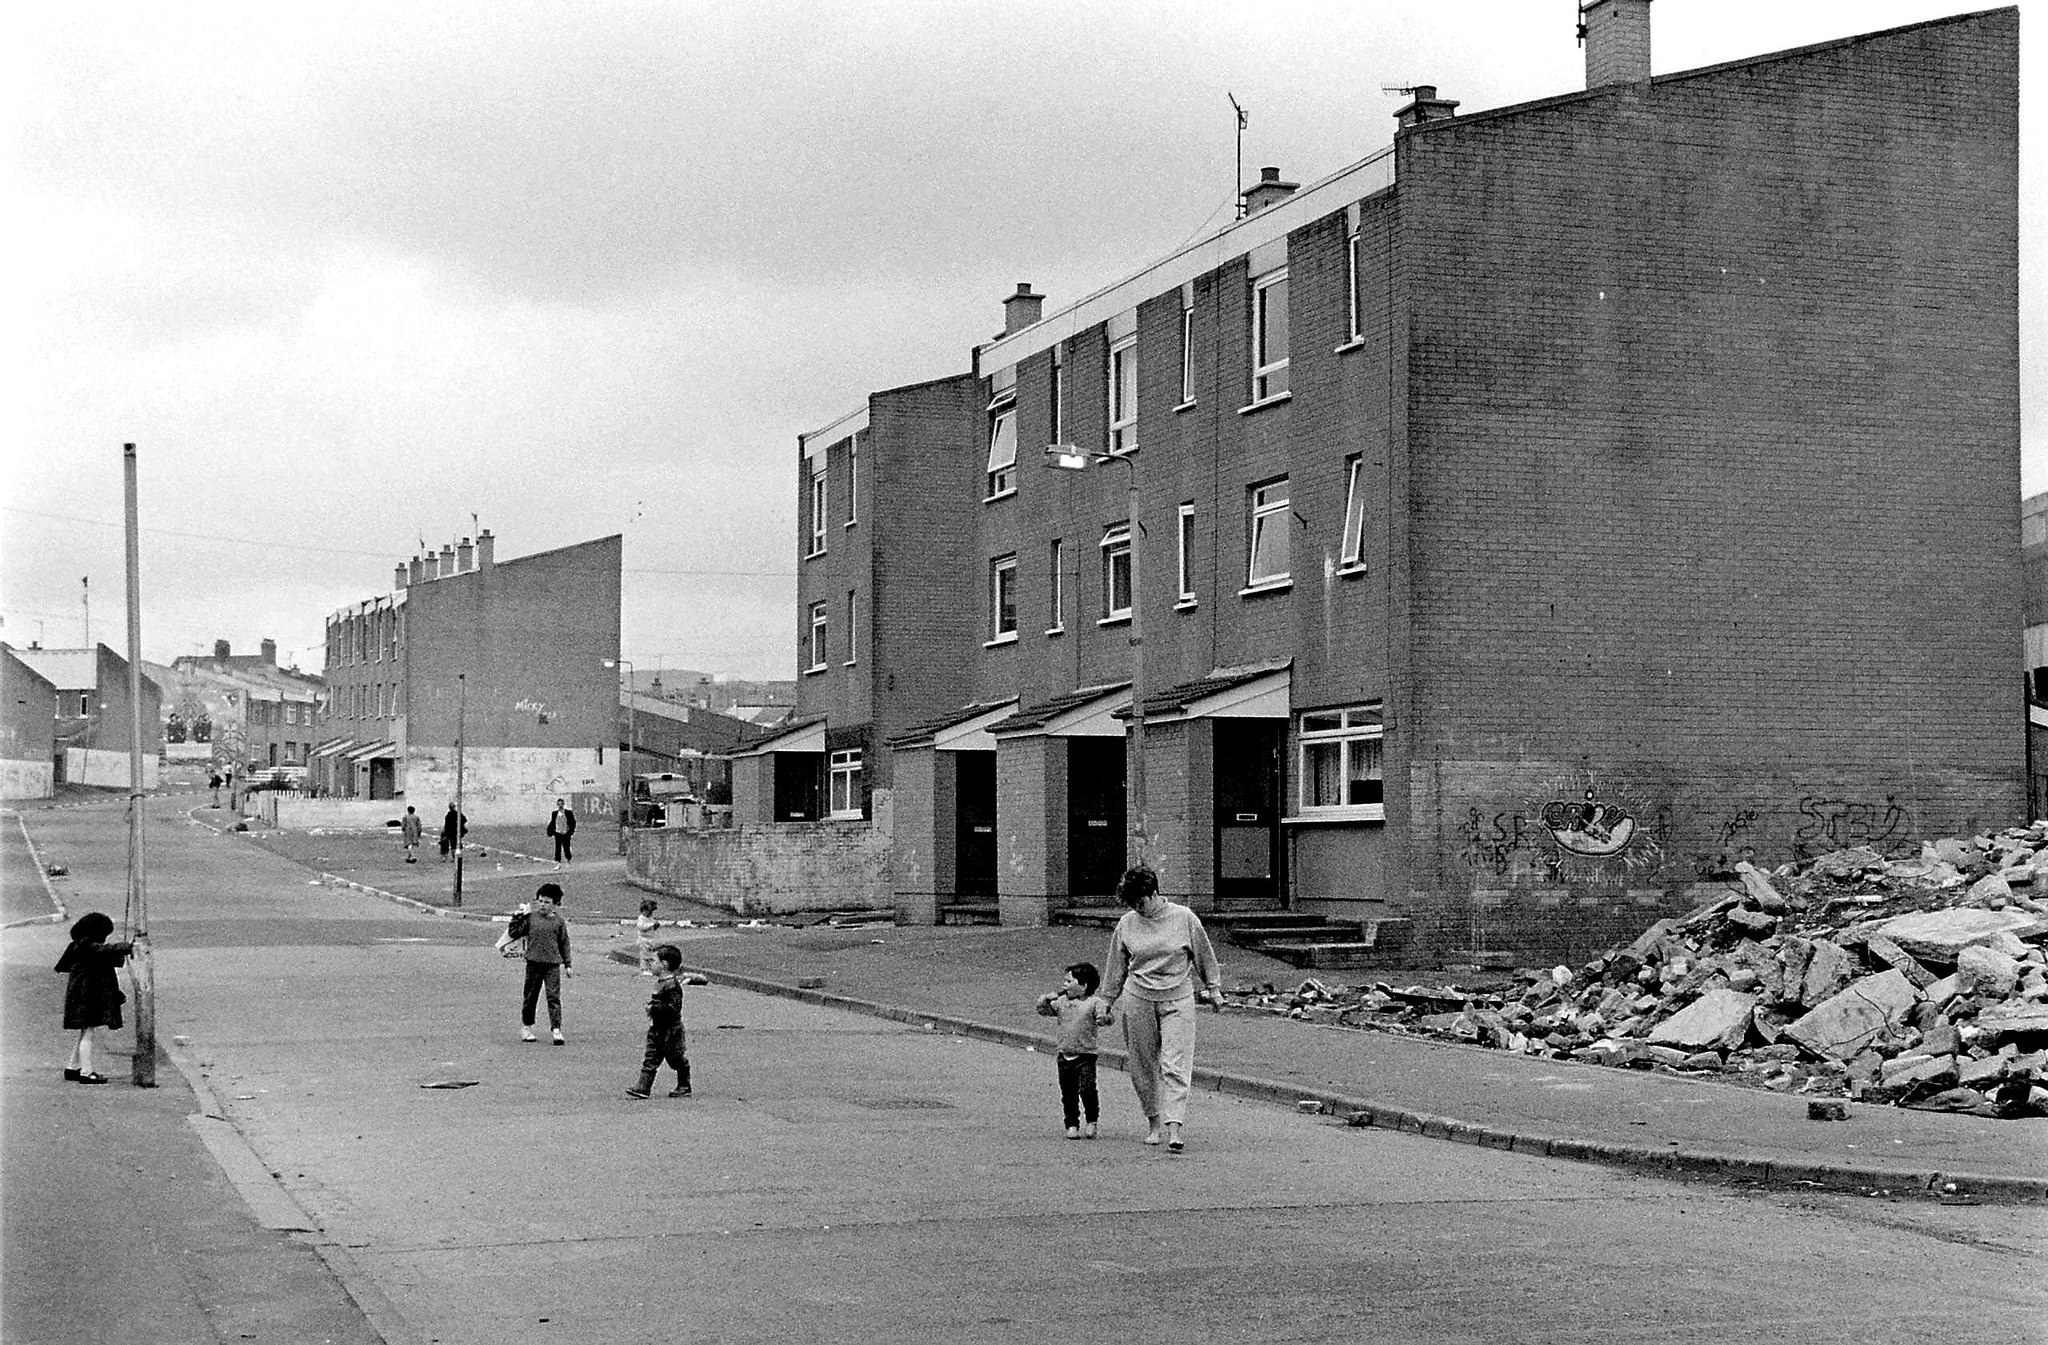 Belfast in April and May 1988